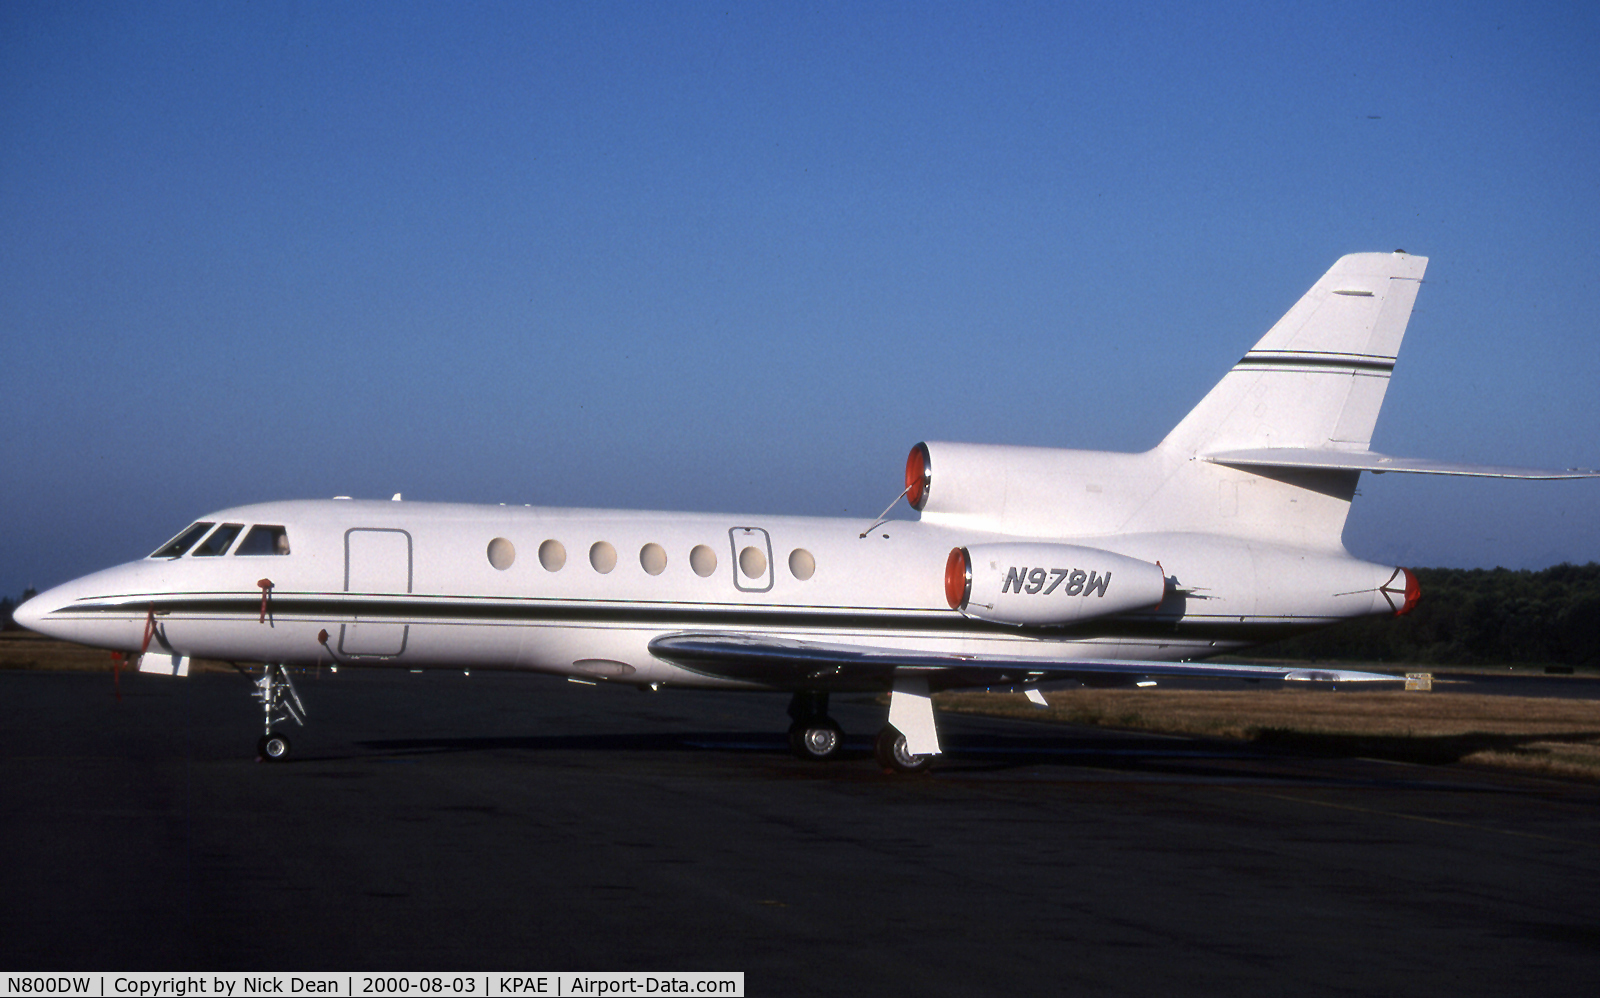 N800DW, 1981 Dassault Falcon 50 C/N 49, Seen here as N978W this airframe is currently registered N800DW as posted